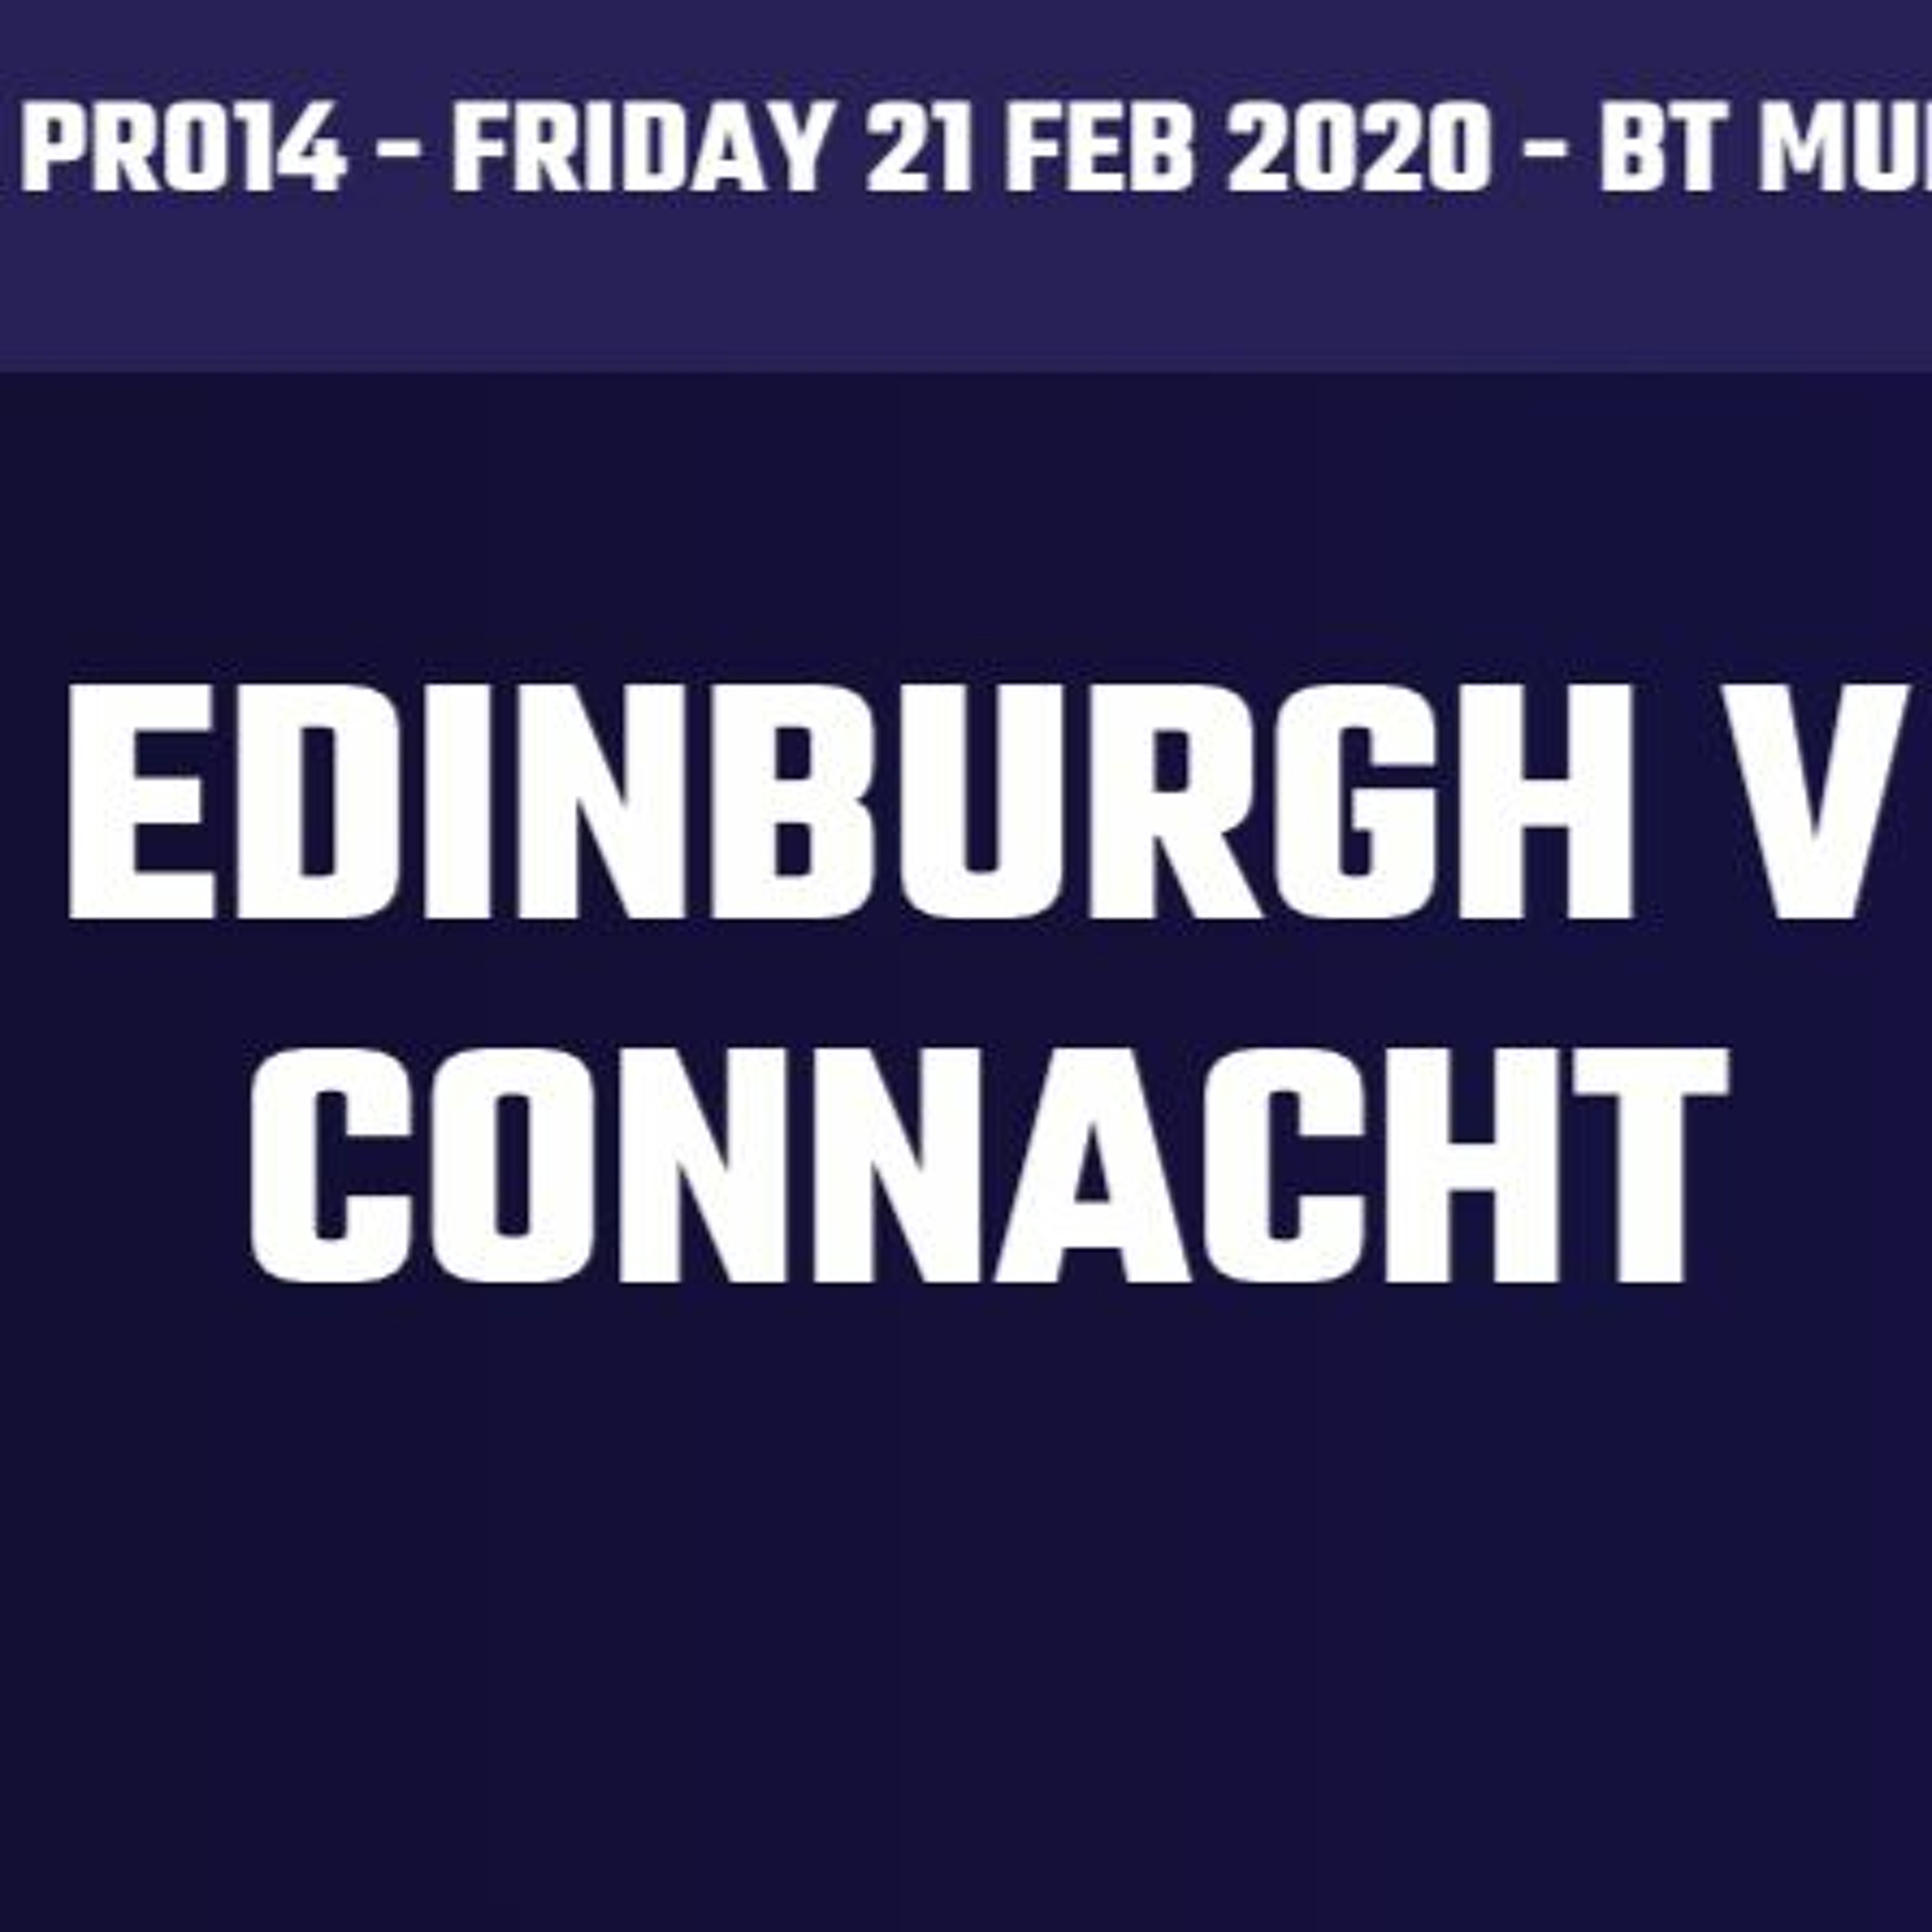 Edinburgh away preview - Craggy Rugby podcast Connacht coverage S5E33